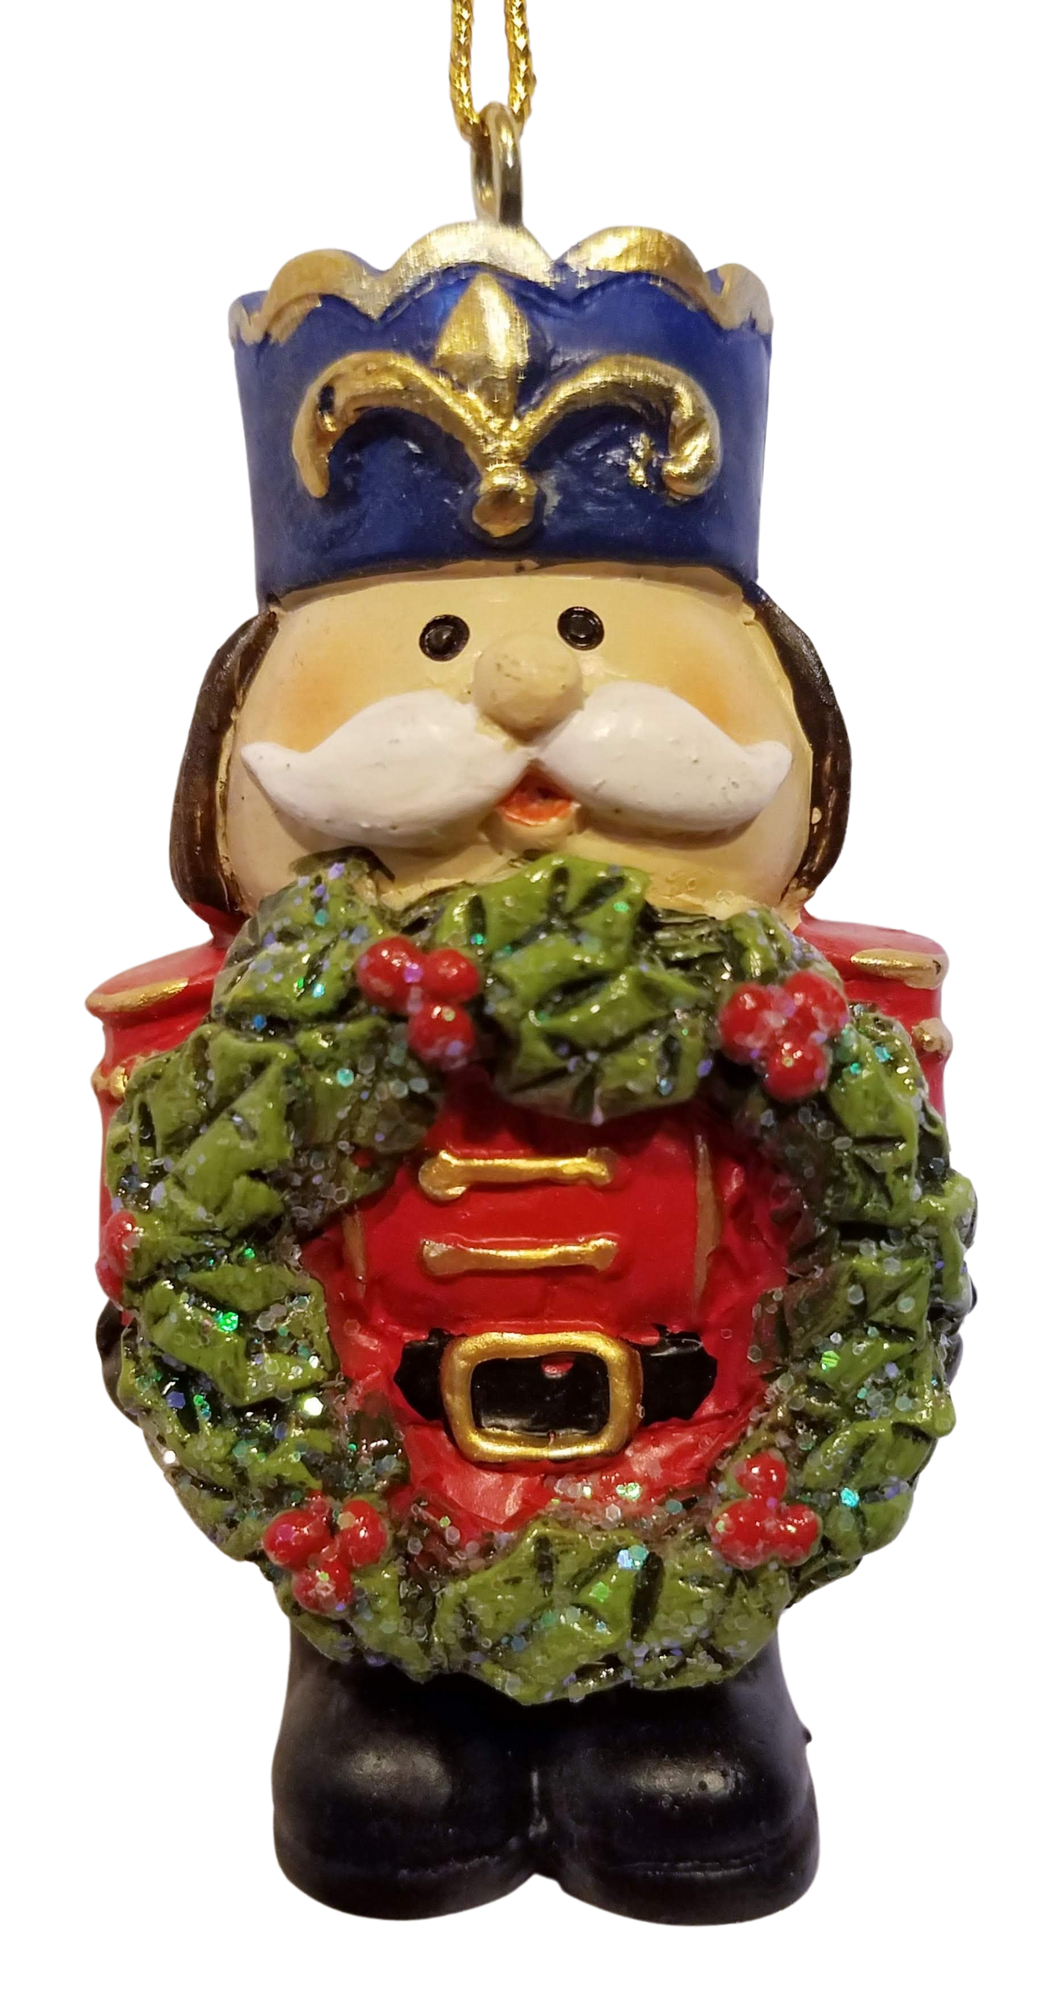 Red Nutcracker Ornament with Blue Hat Holding Christmas Wreath